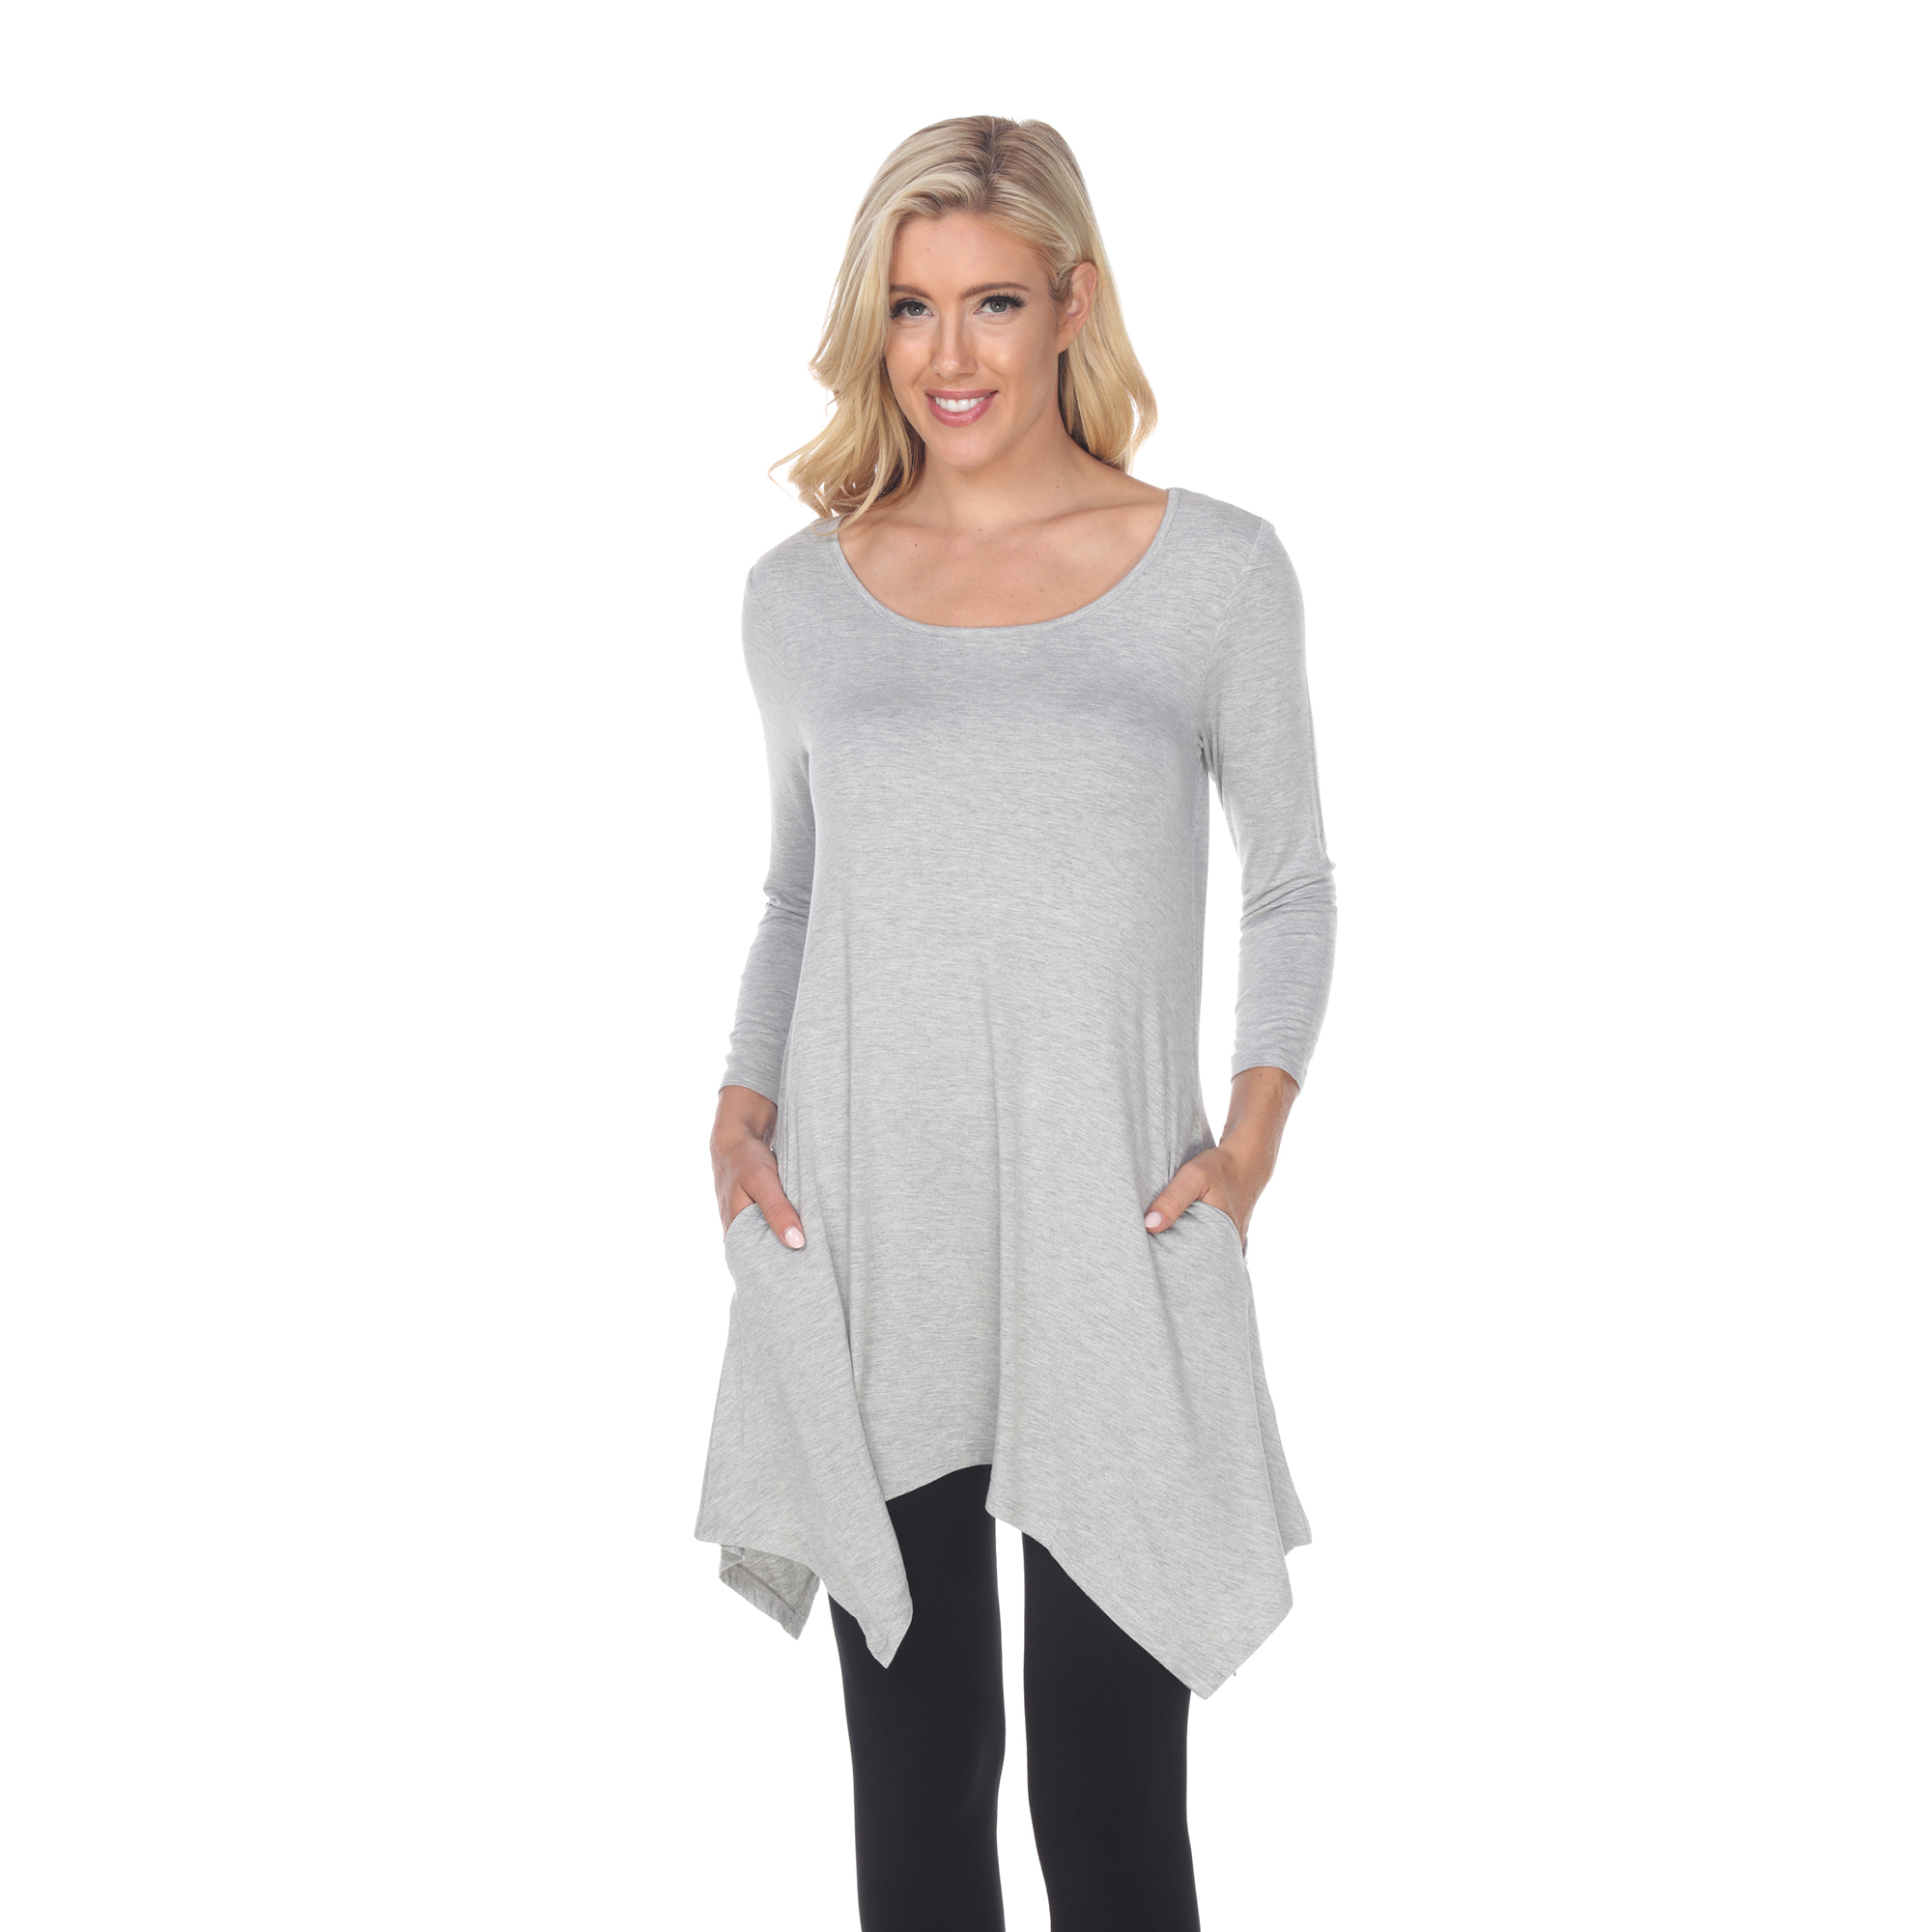 White Mark Women's Quarter Sleeve Tunic Top With Pockets - Heather Grey, 4X